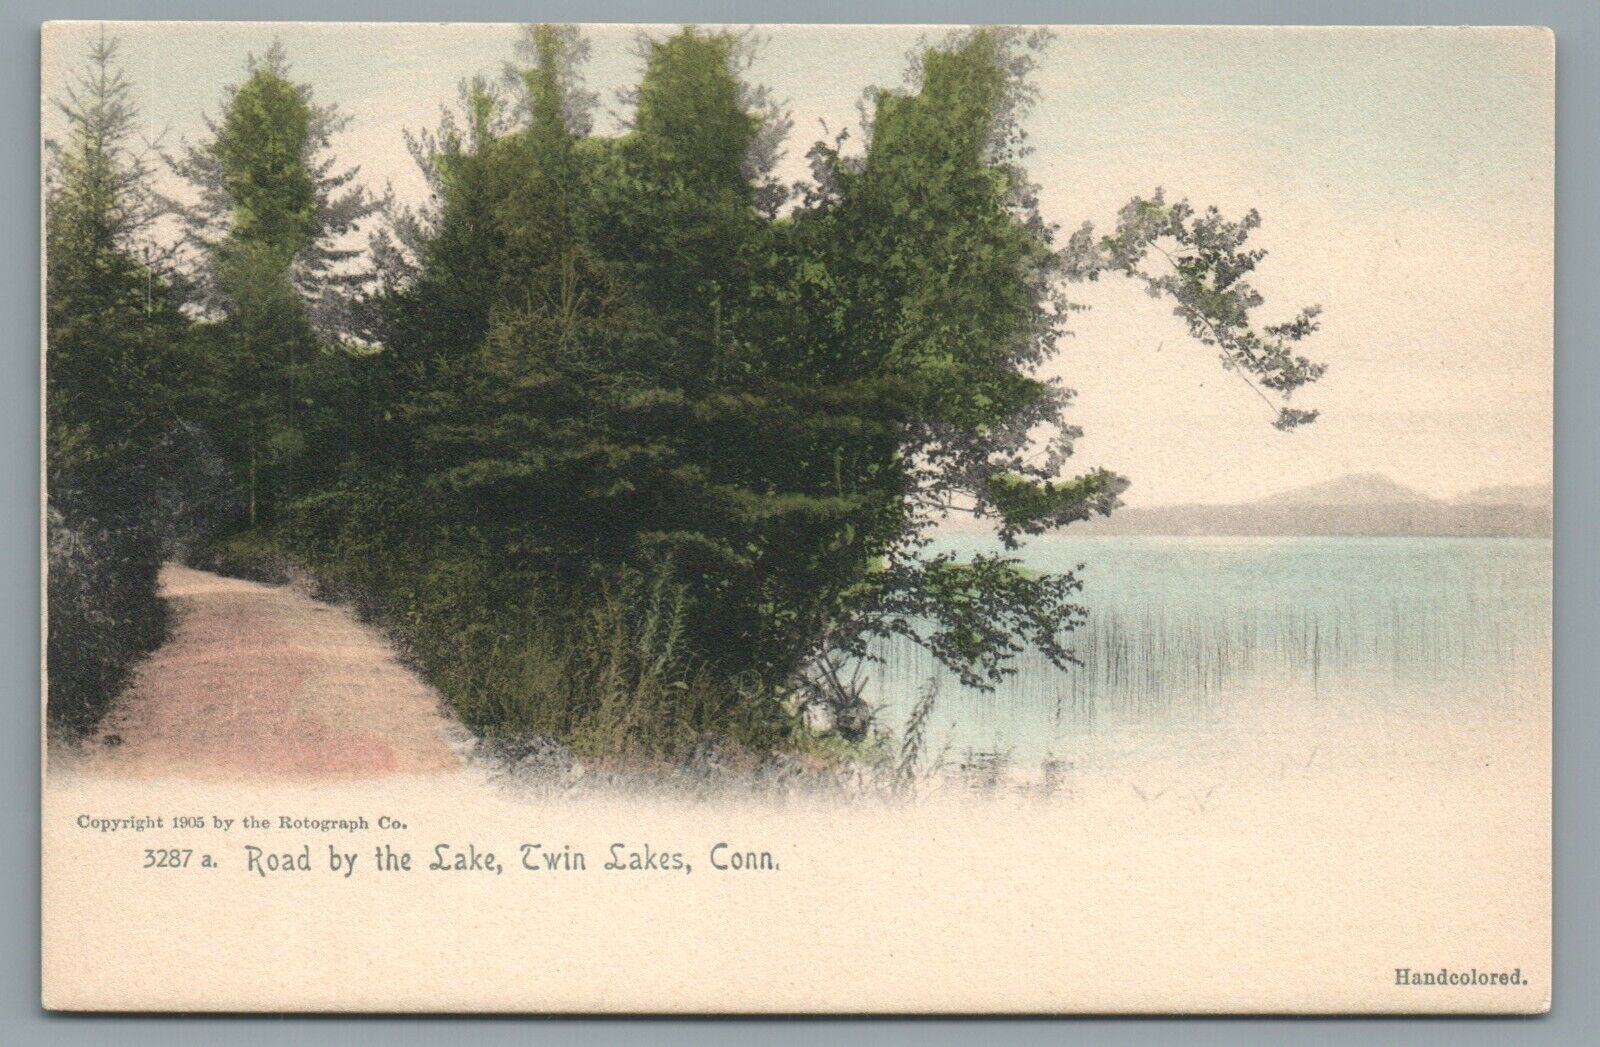 Road by the Lake, Twin Lakes, Conn. CT Hand Colored Vintage Postcard c1905